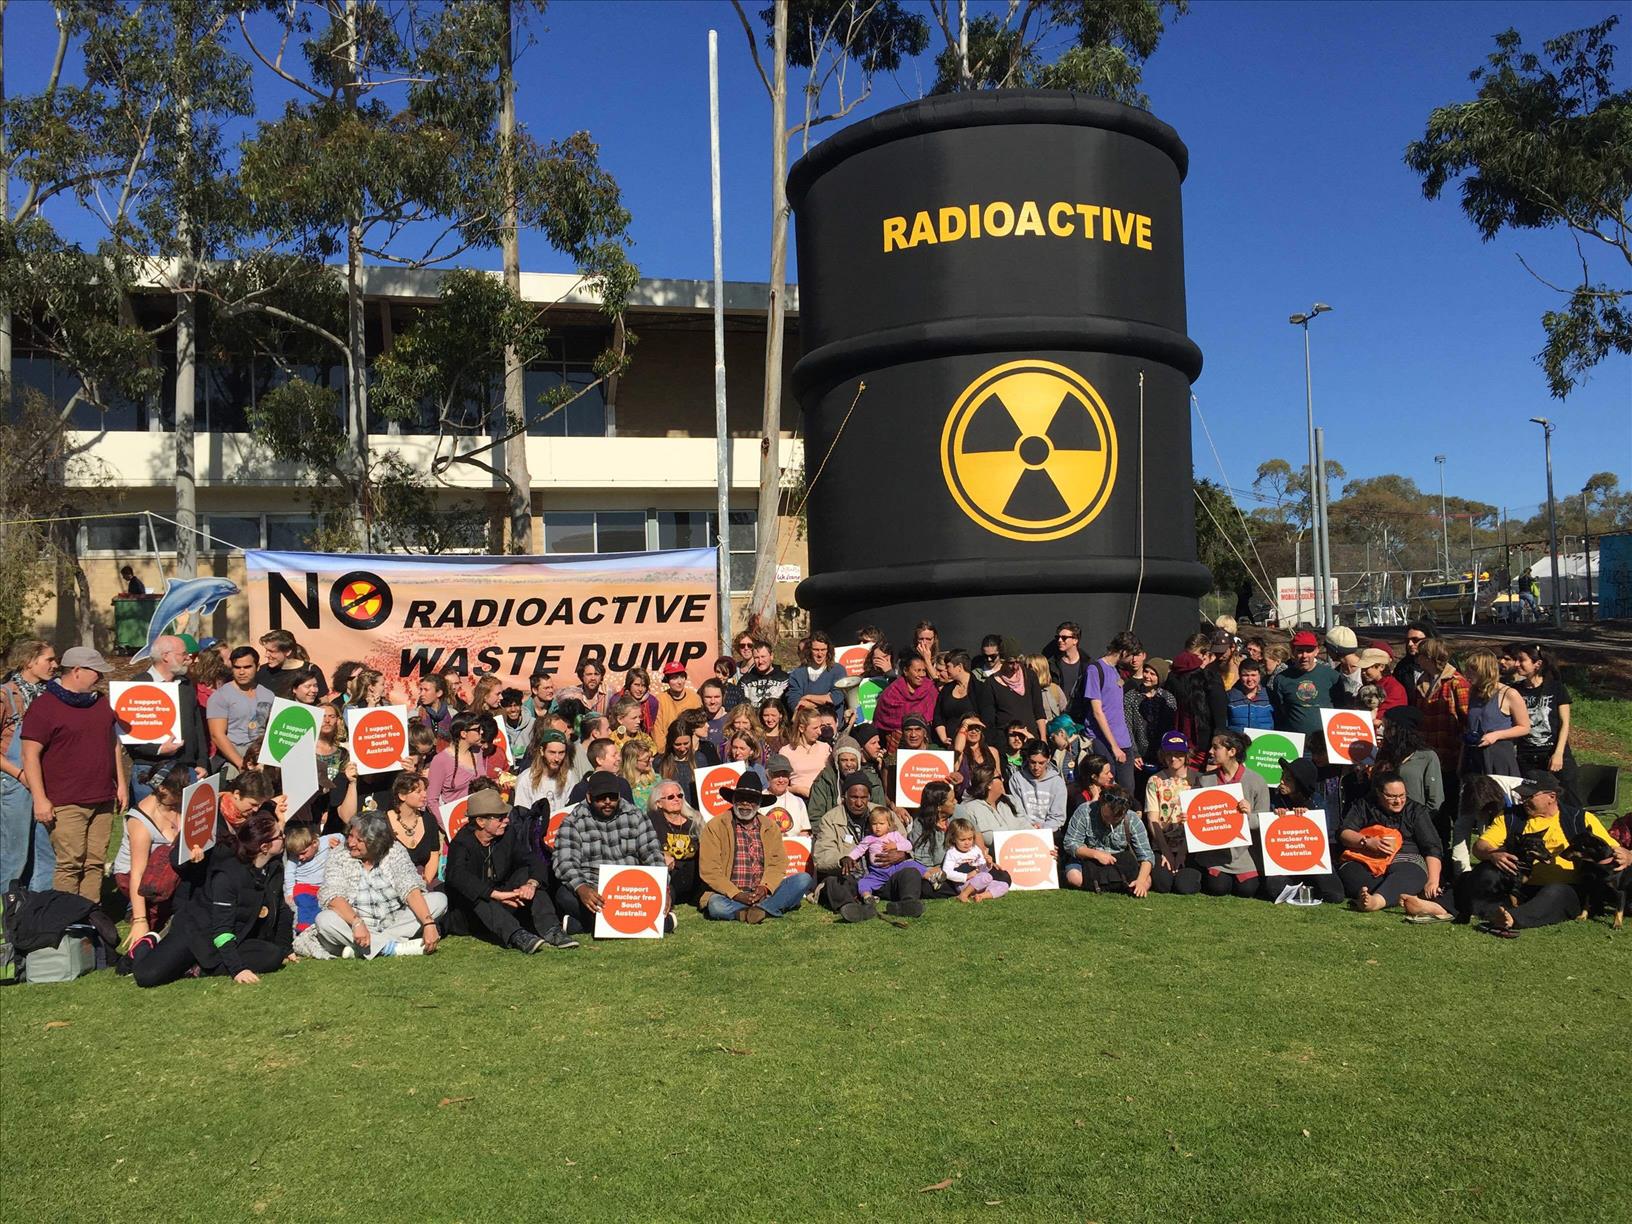 3 reasons the announcement to dump radioactive waste in South Australia is extremely premature